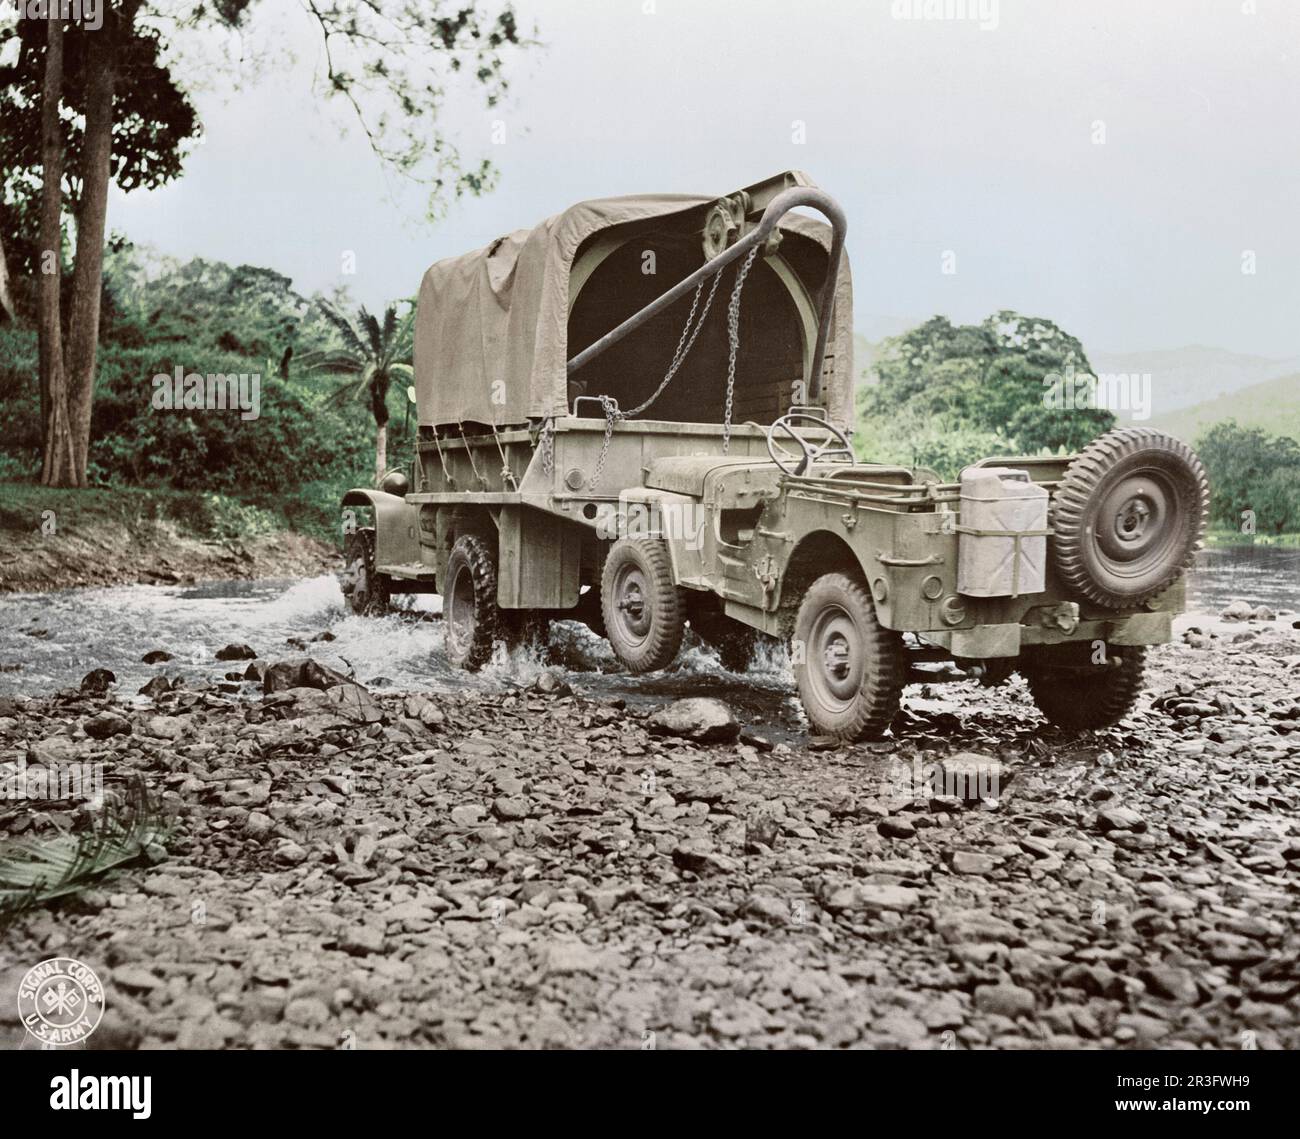 A U.S. military truck with wrecker mount towing a jeep, 1942. Stock Photo